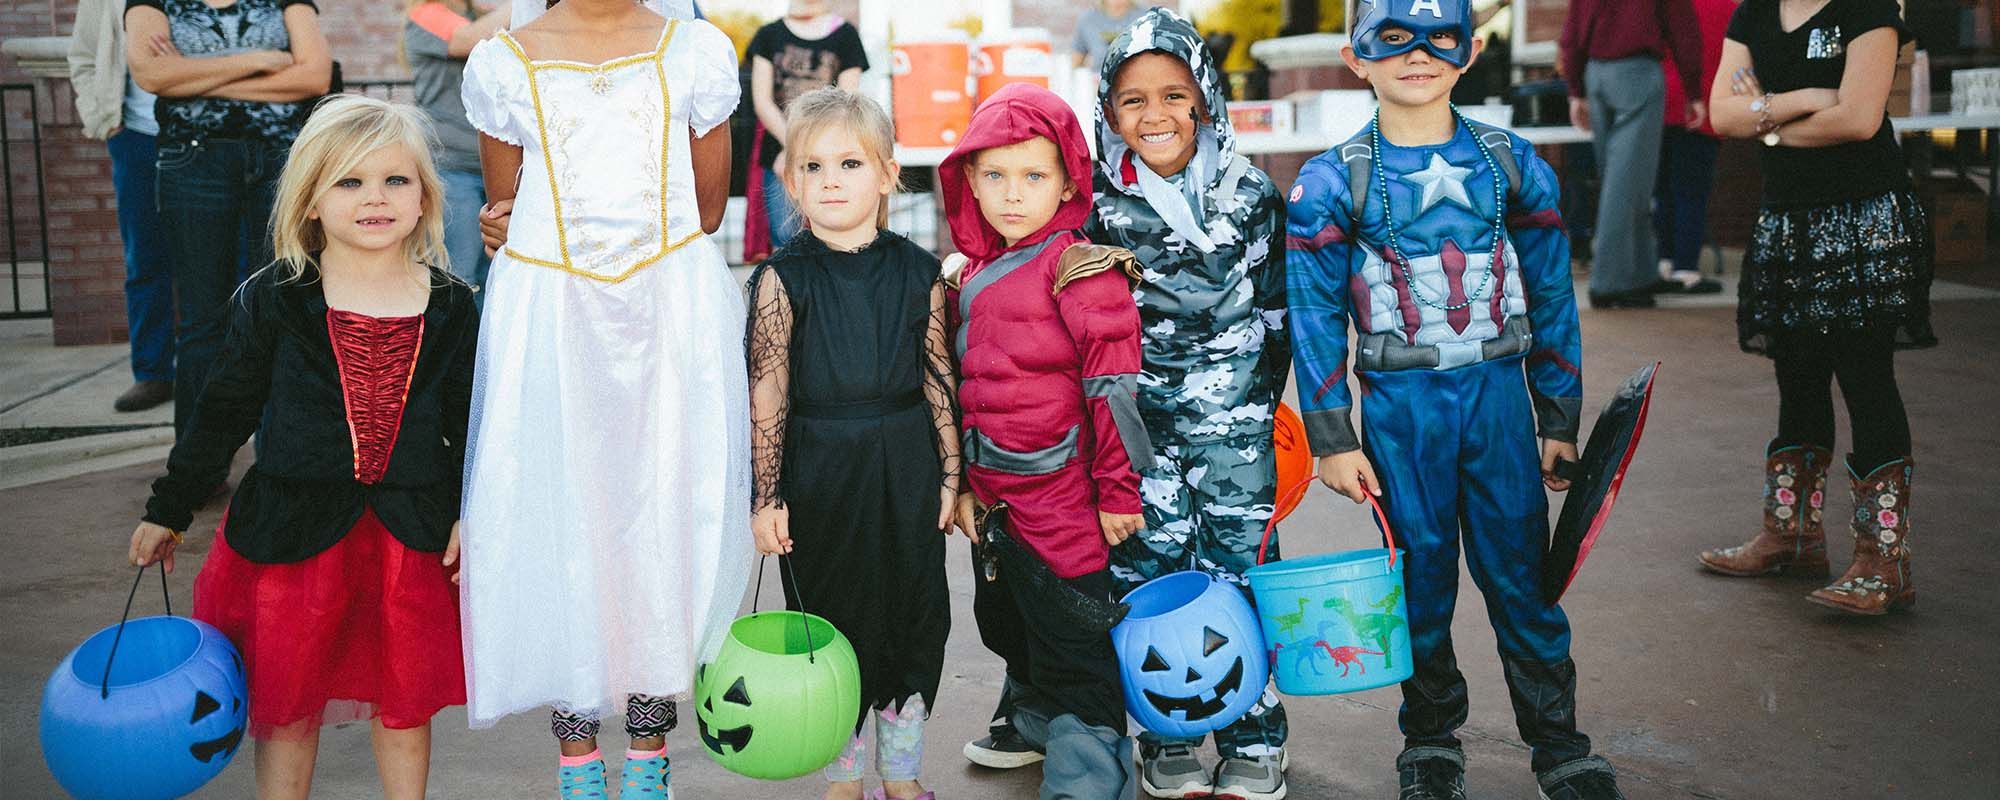 PHCC’s Safety Tips for Halloween